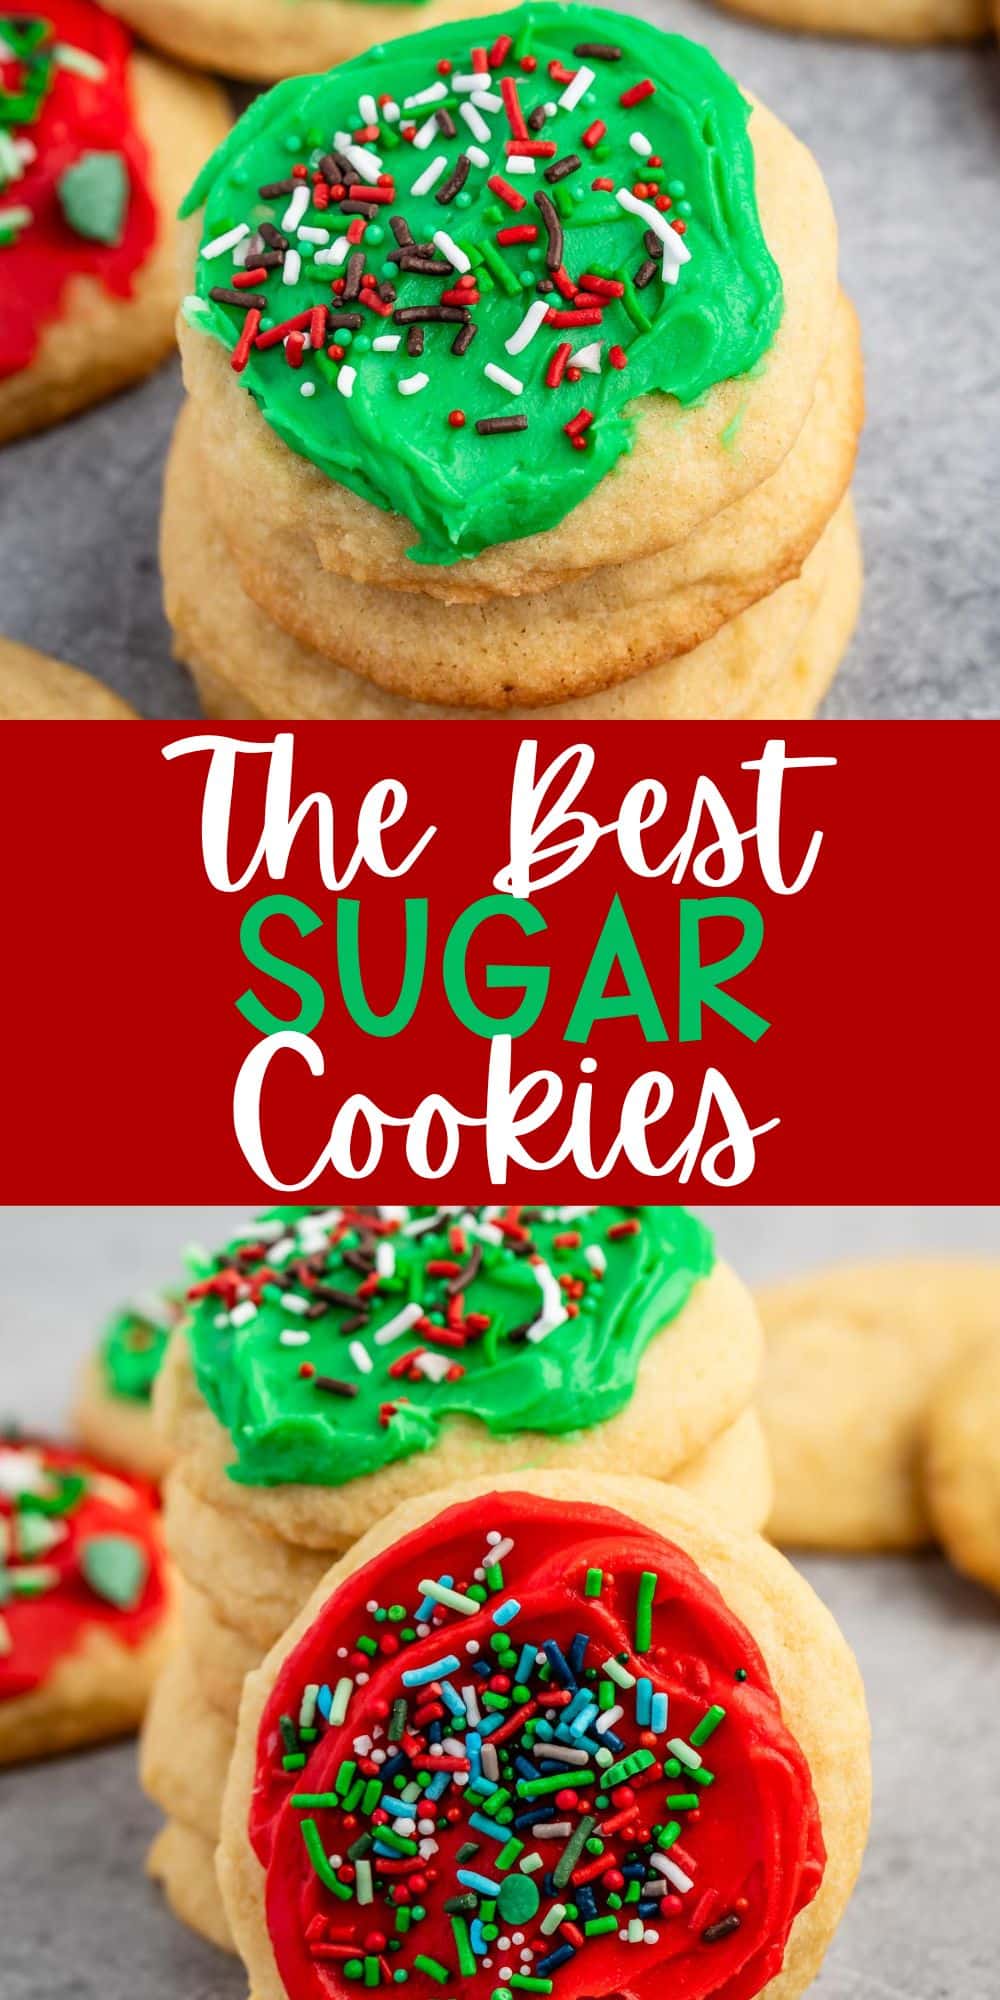 two photos of stacked cookies with green and red frosting with green and red sprinkles on top with words on the image.